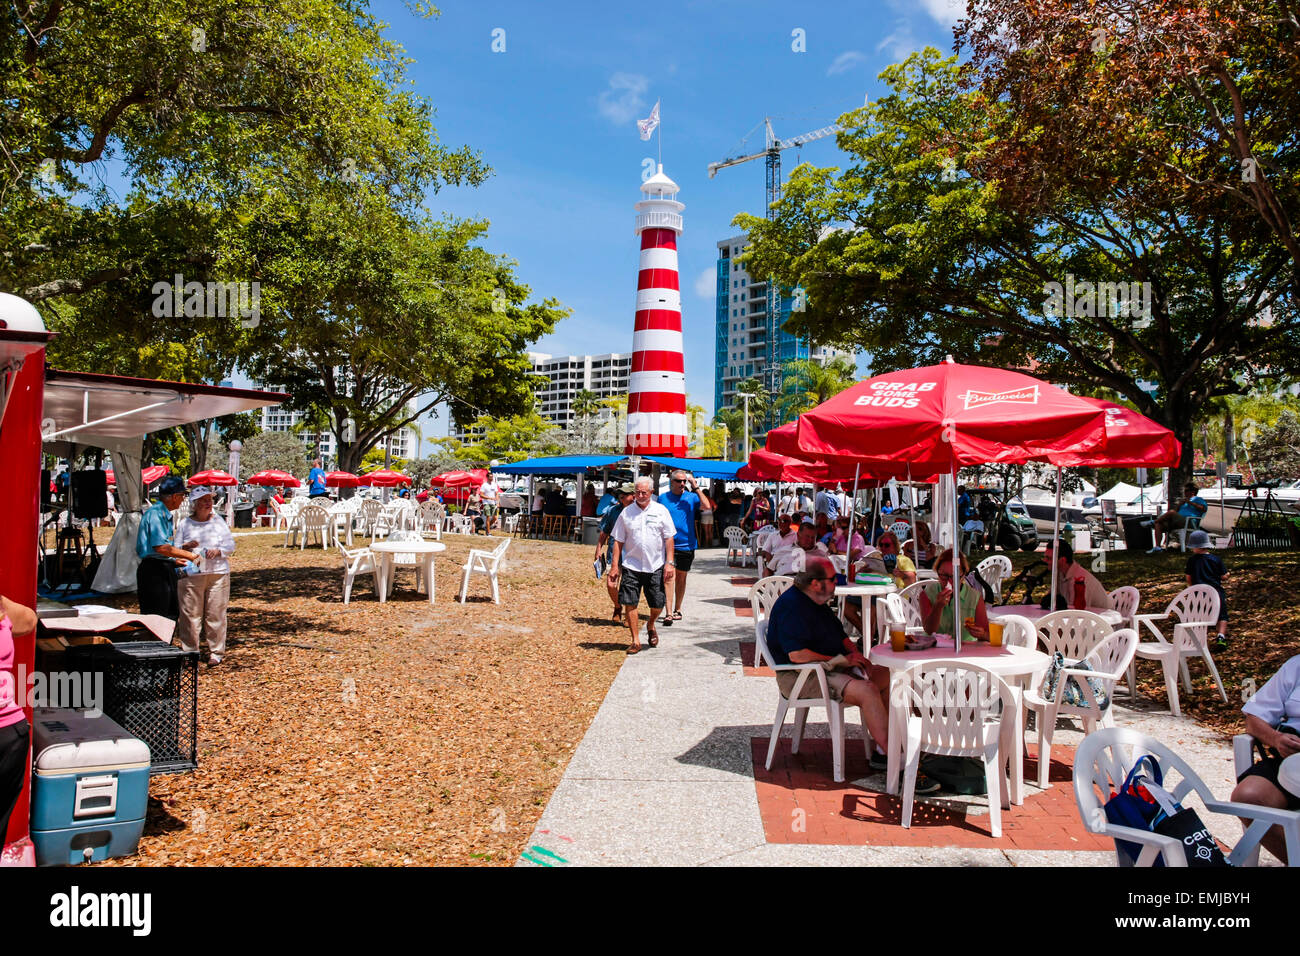 Red and white lighthouse on display with refreshments and seating at the Suncoast boat show at the downtown waterfront Marina Ja Stock Photo